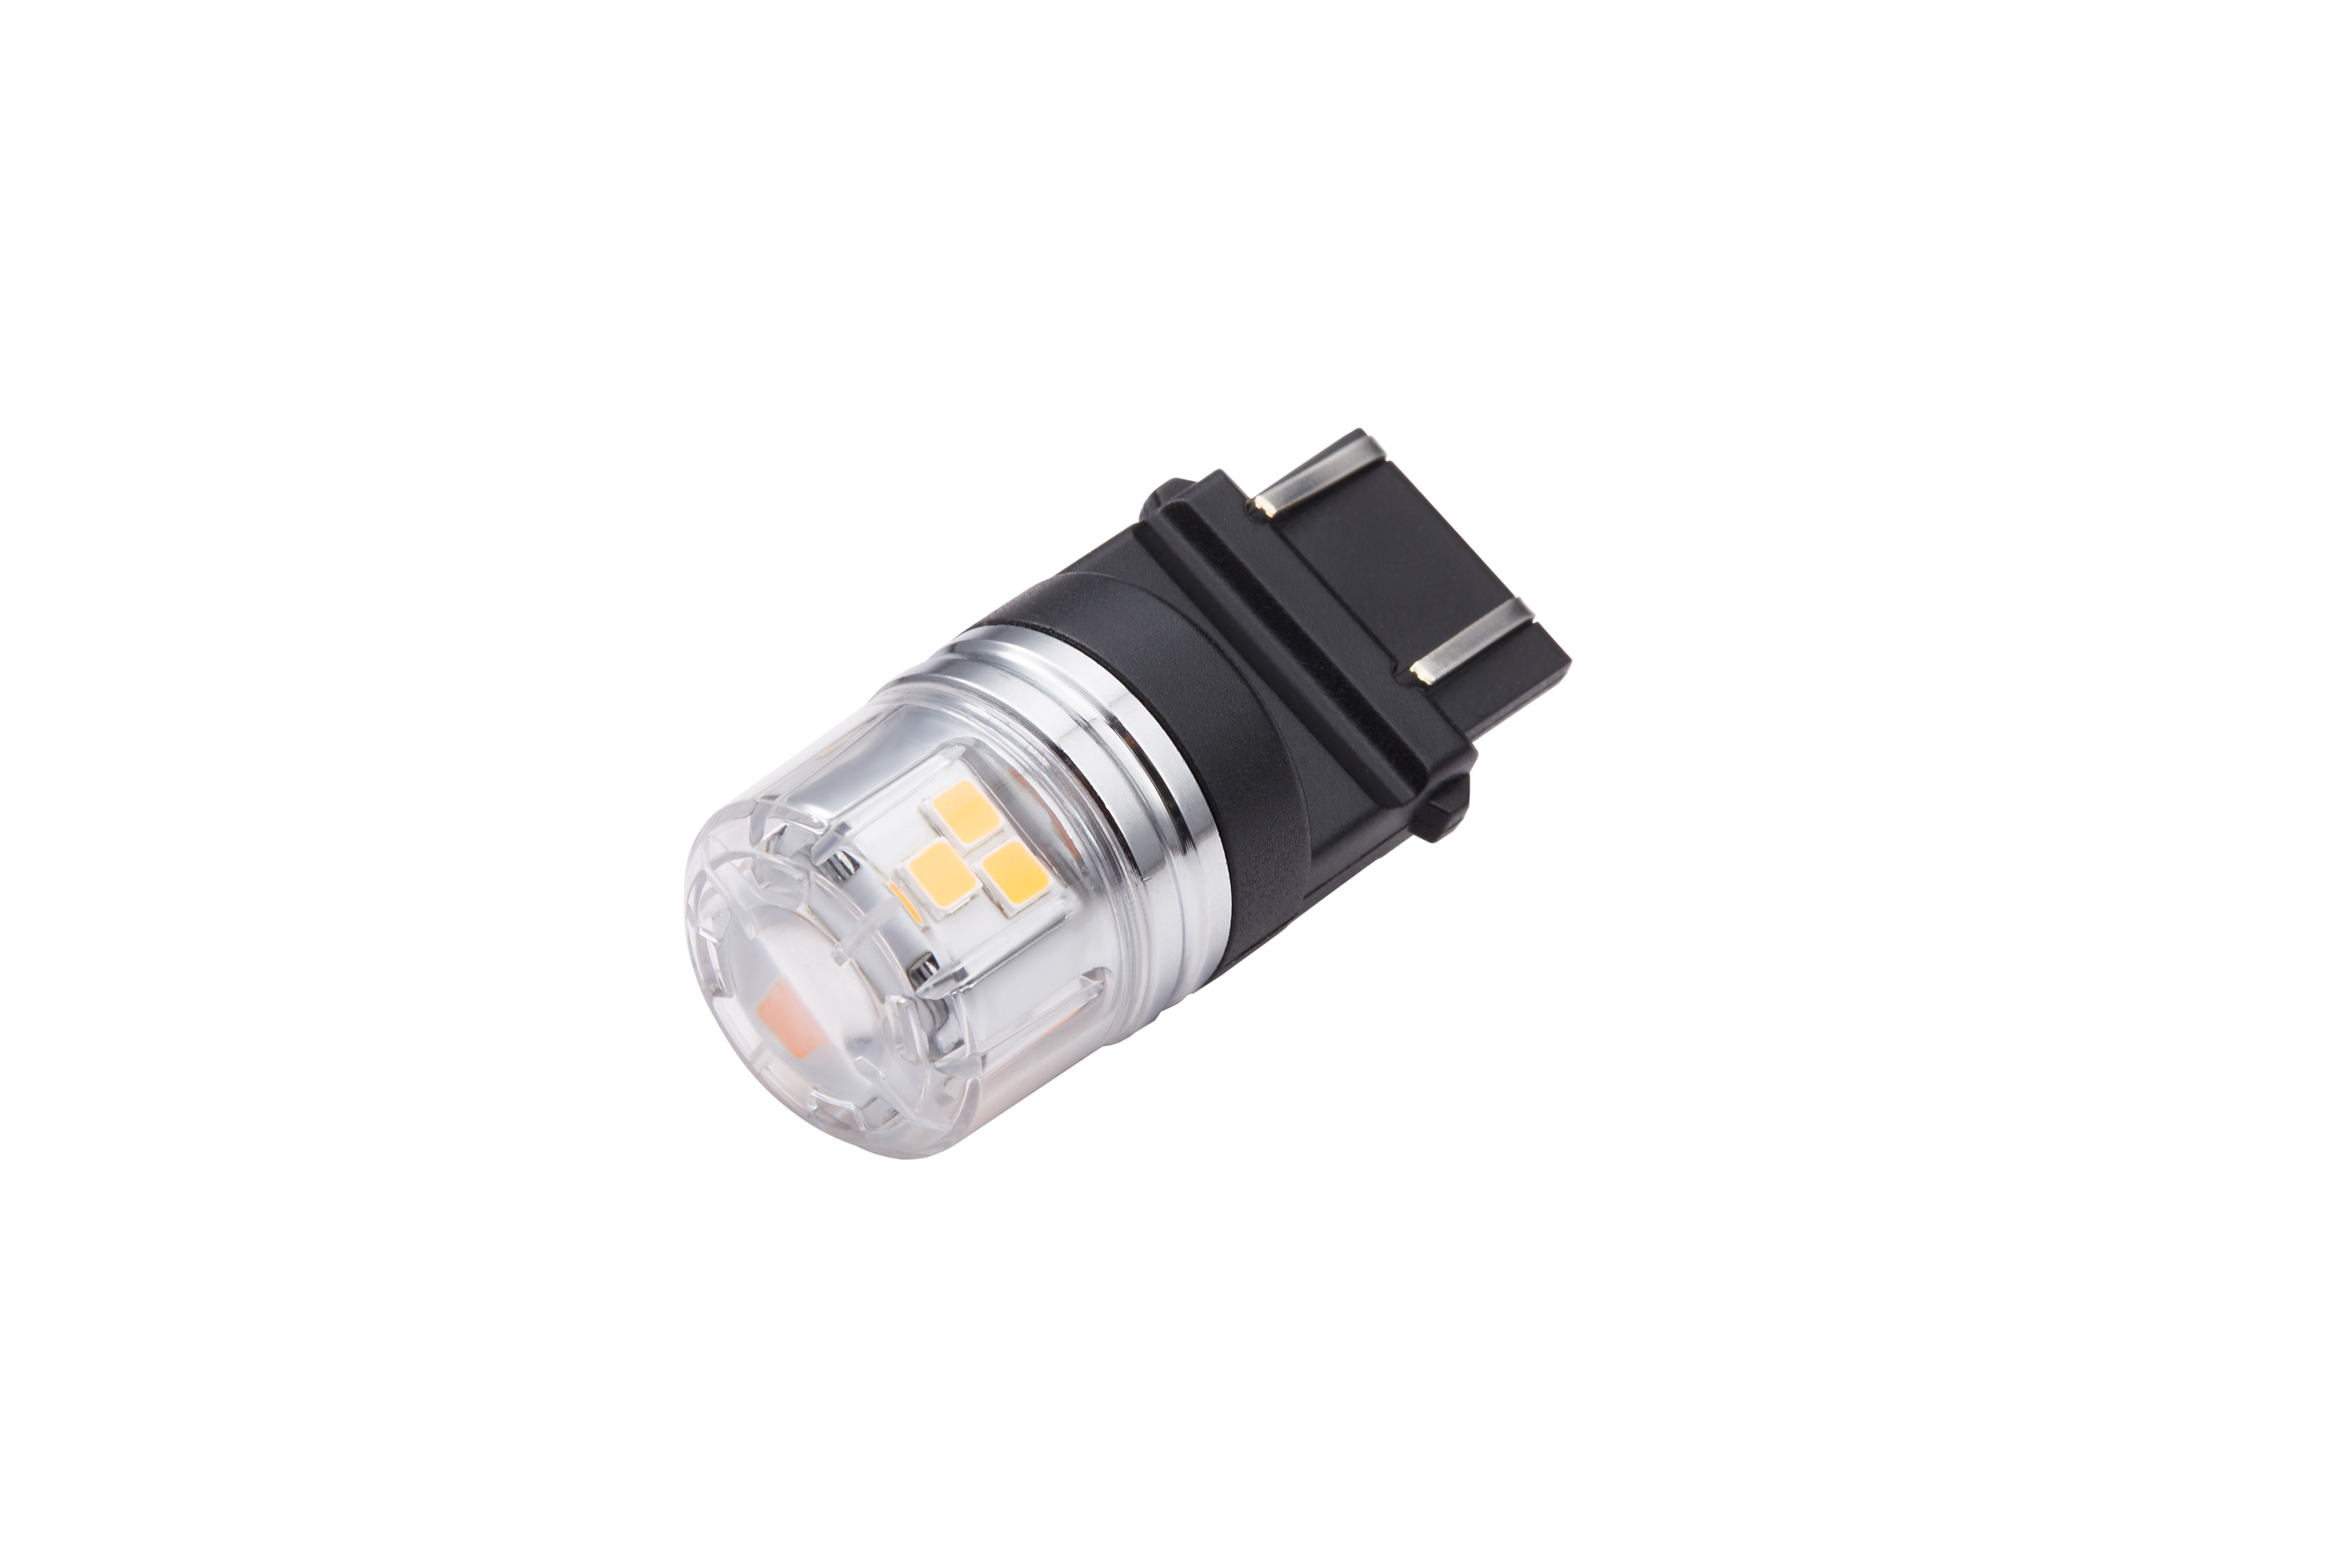 Eklight Canbus BAU15S BA15S 1156 1157 BAY15D Amber turn signal light T20 White DRL light Featured Image